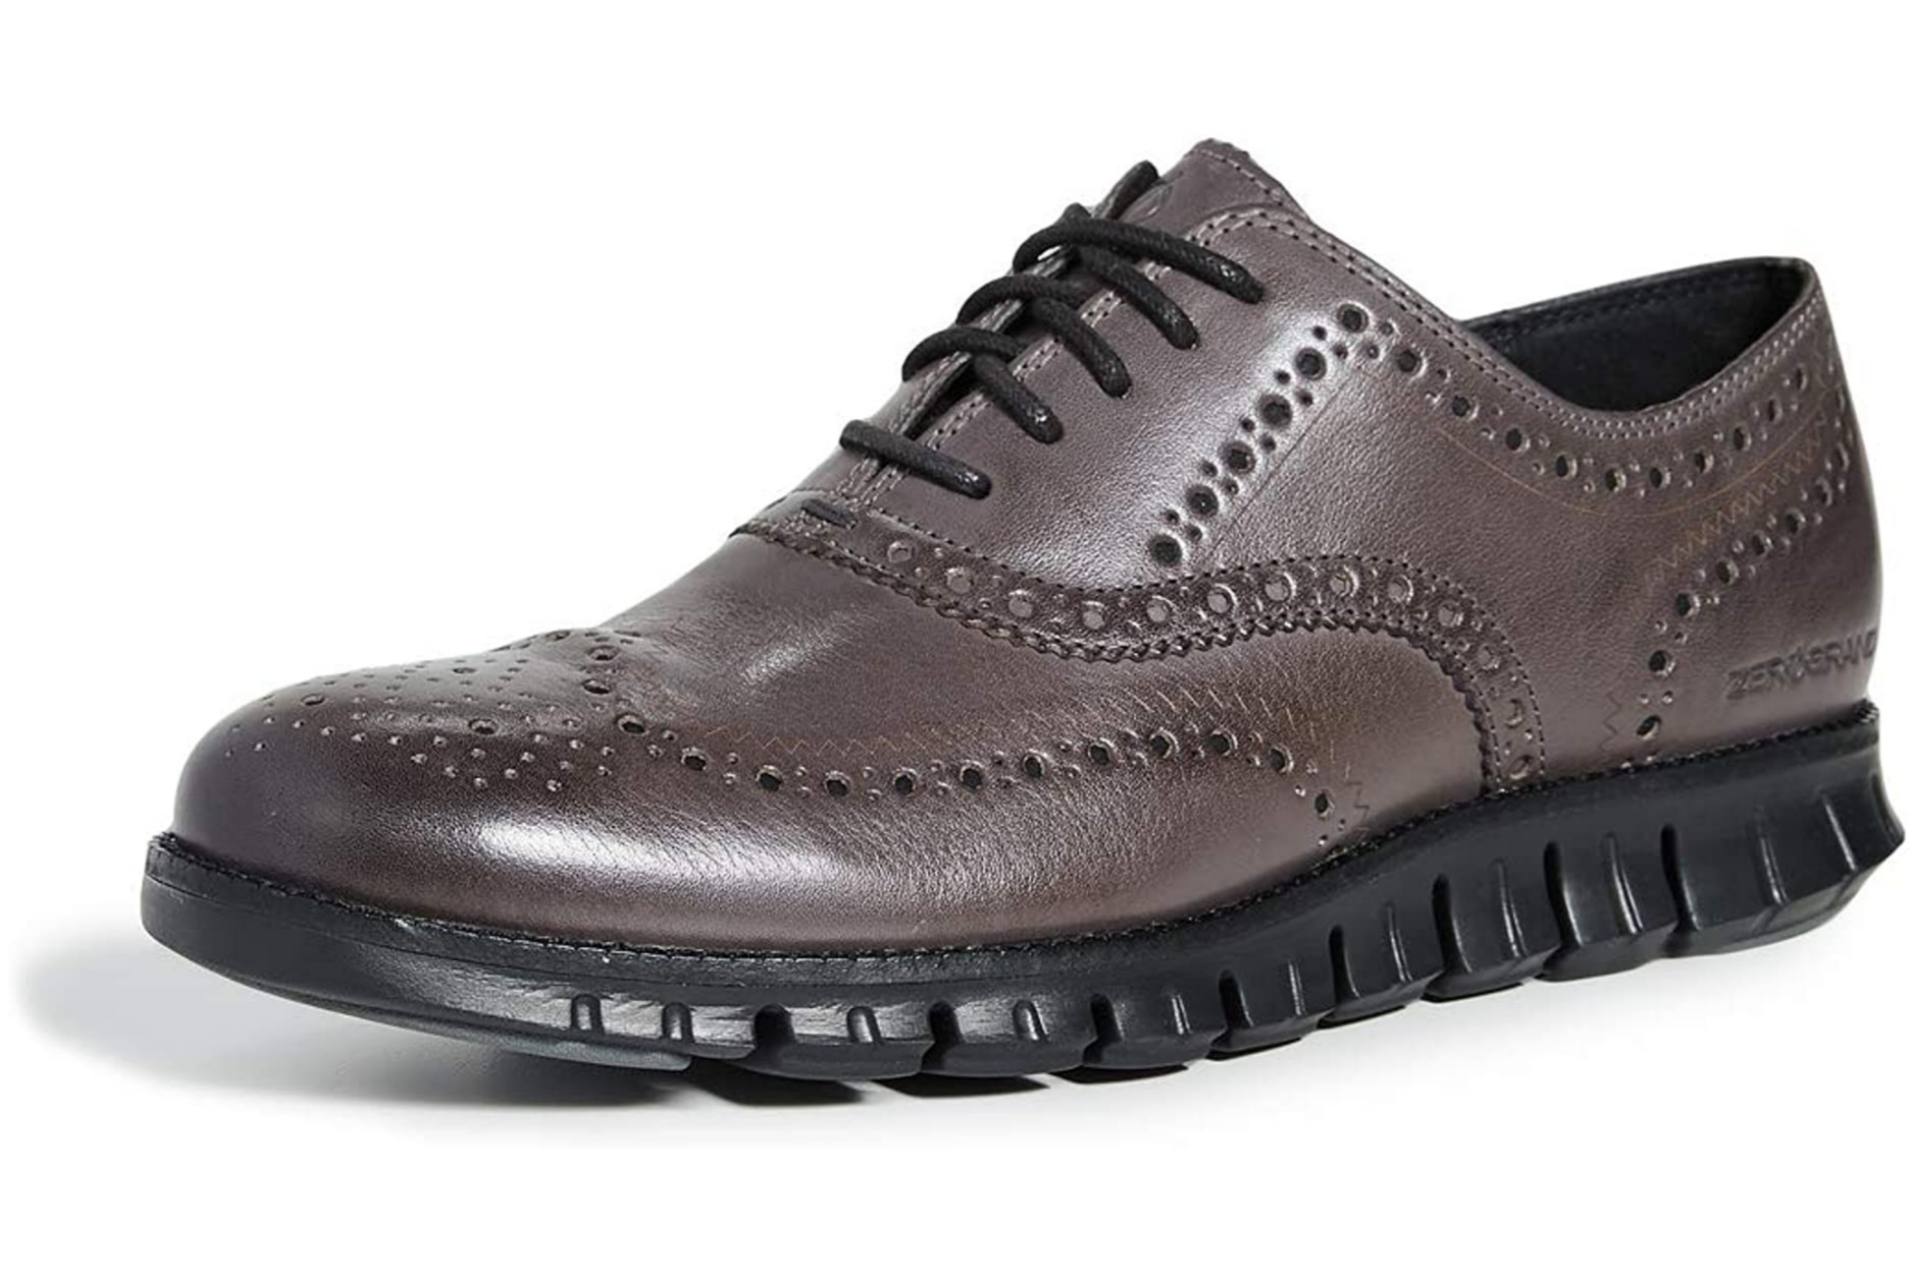 Men's work oxford shoes